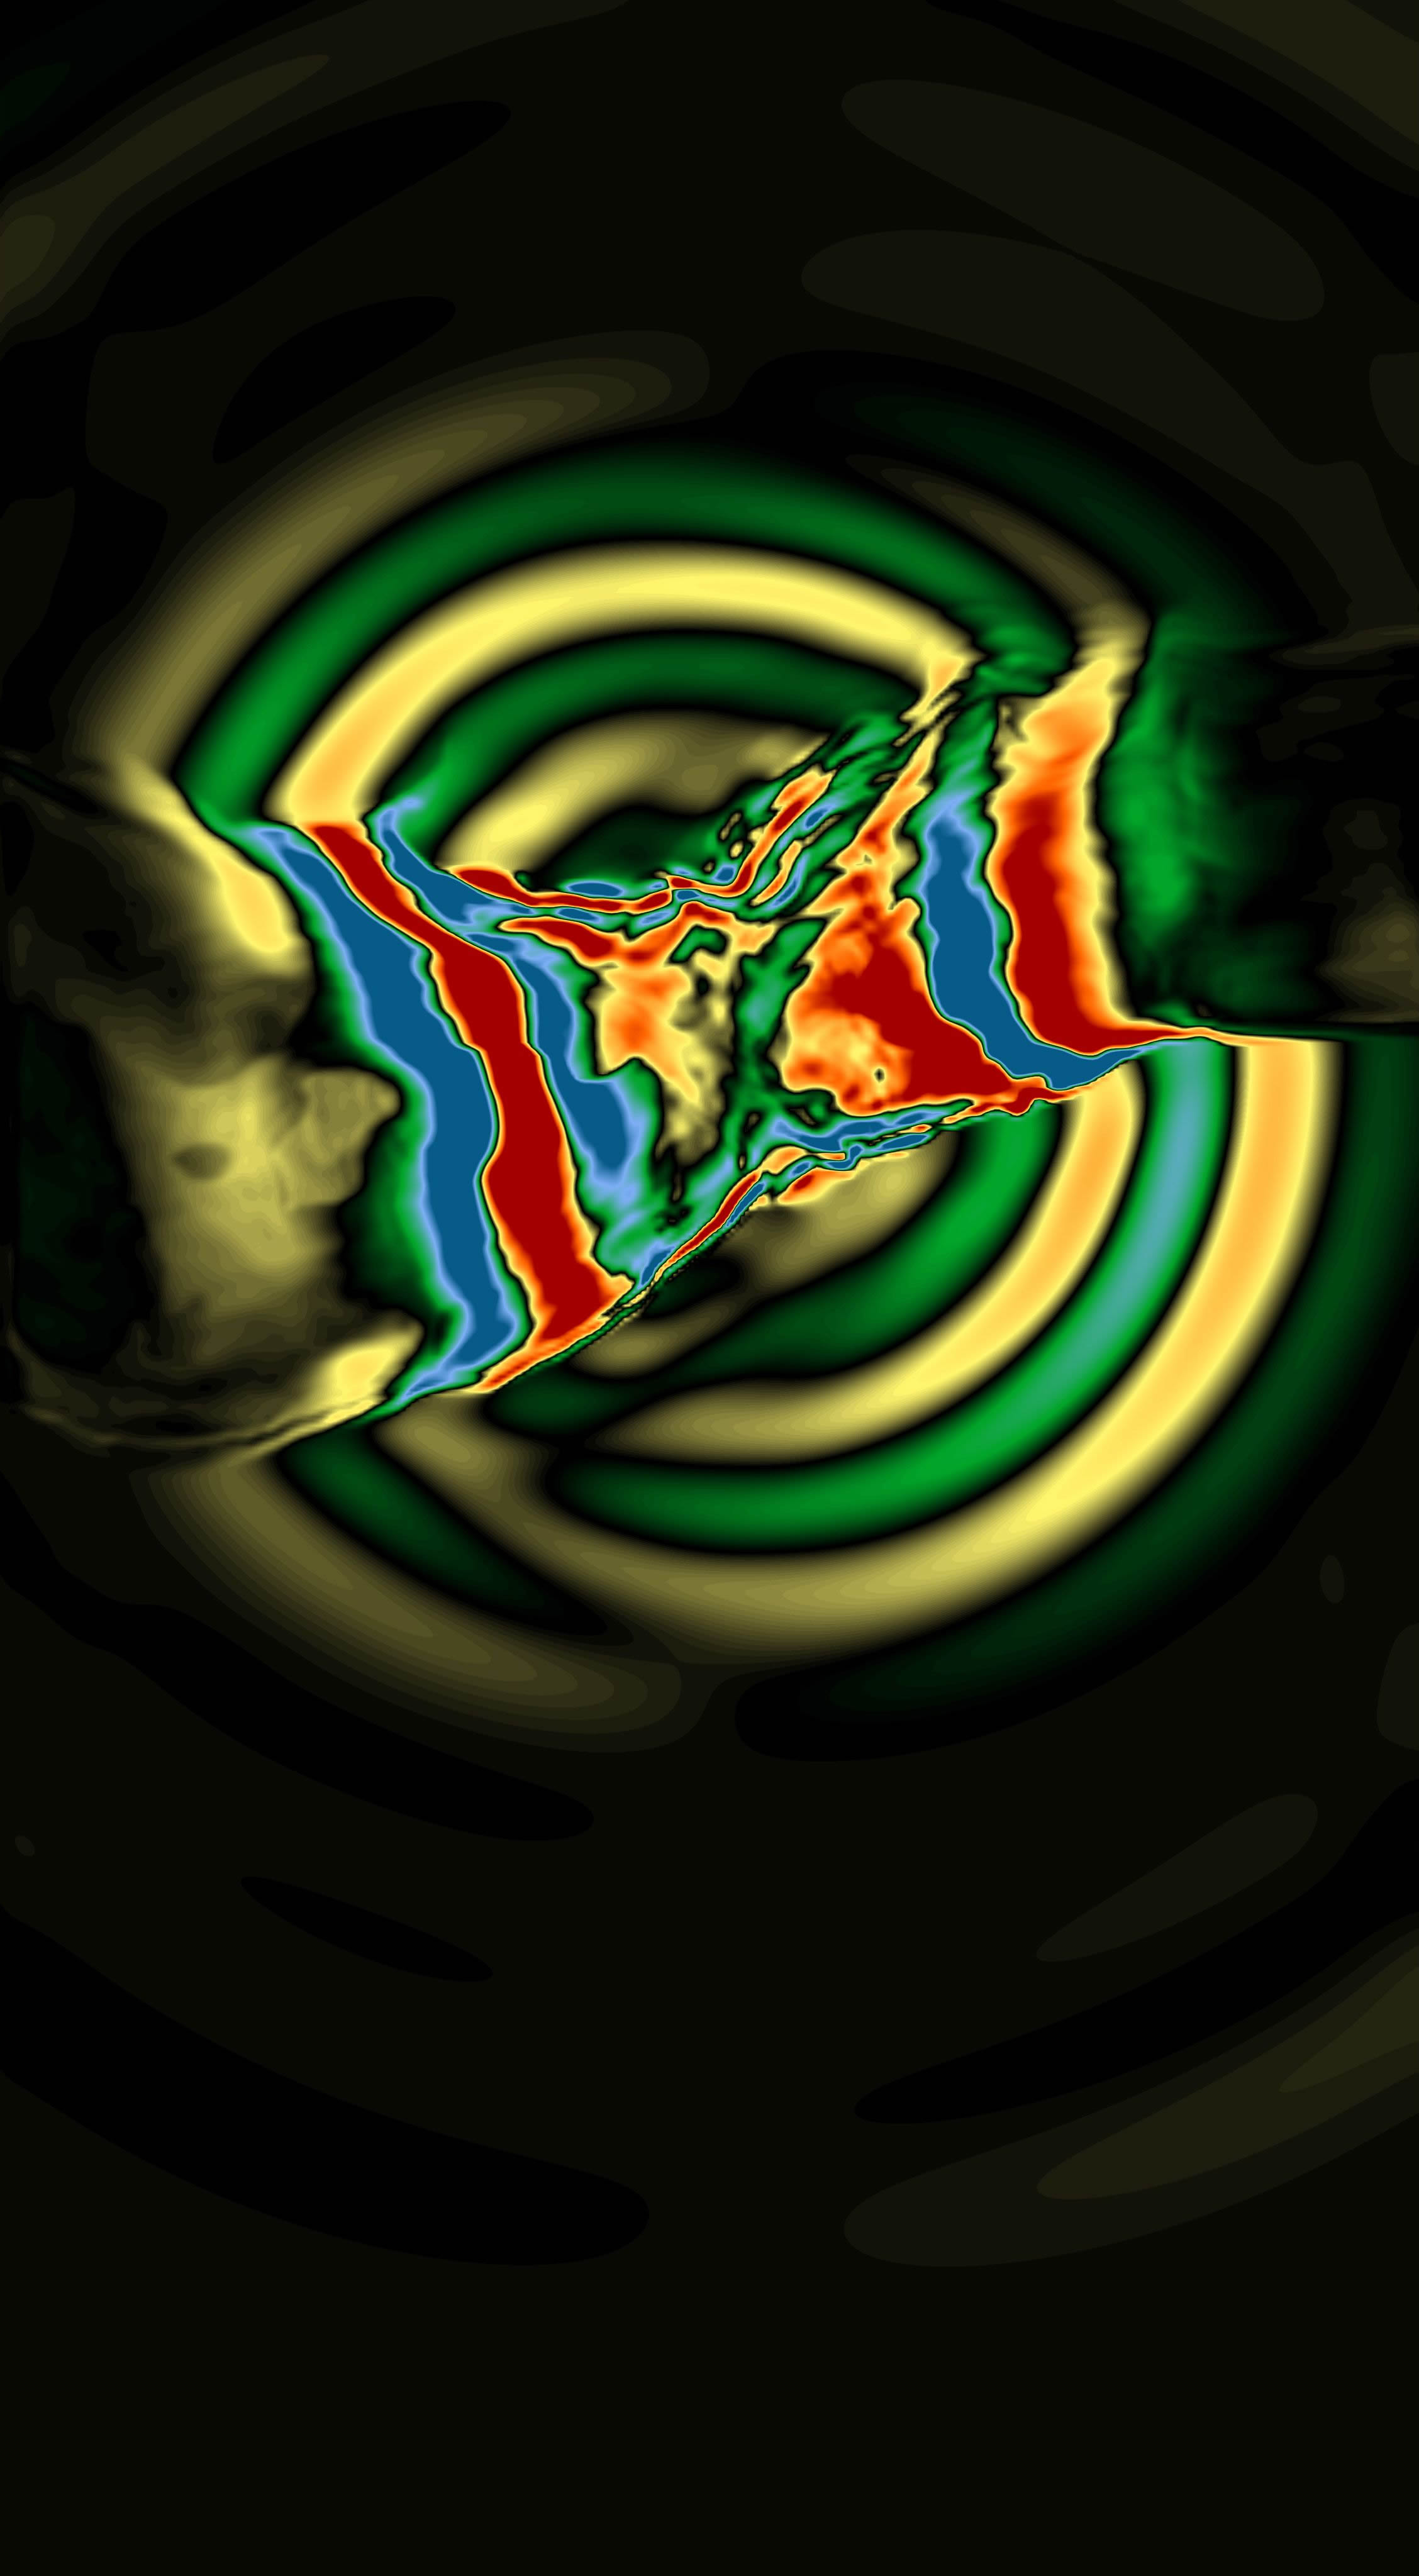 Simulation of an earthquake by the PSC